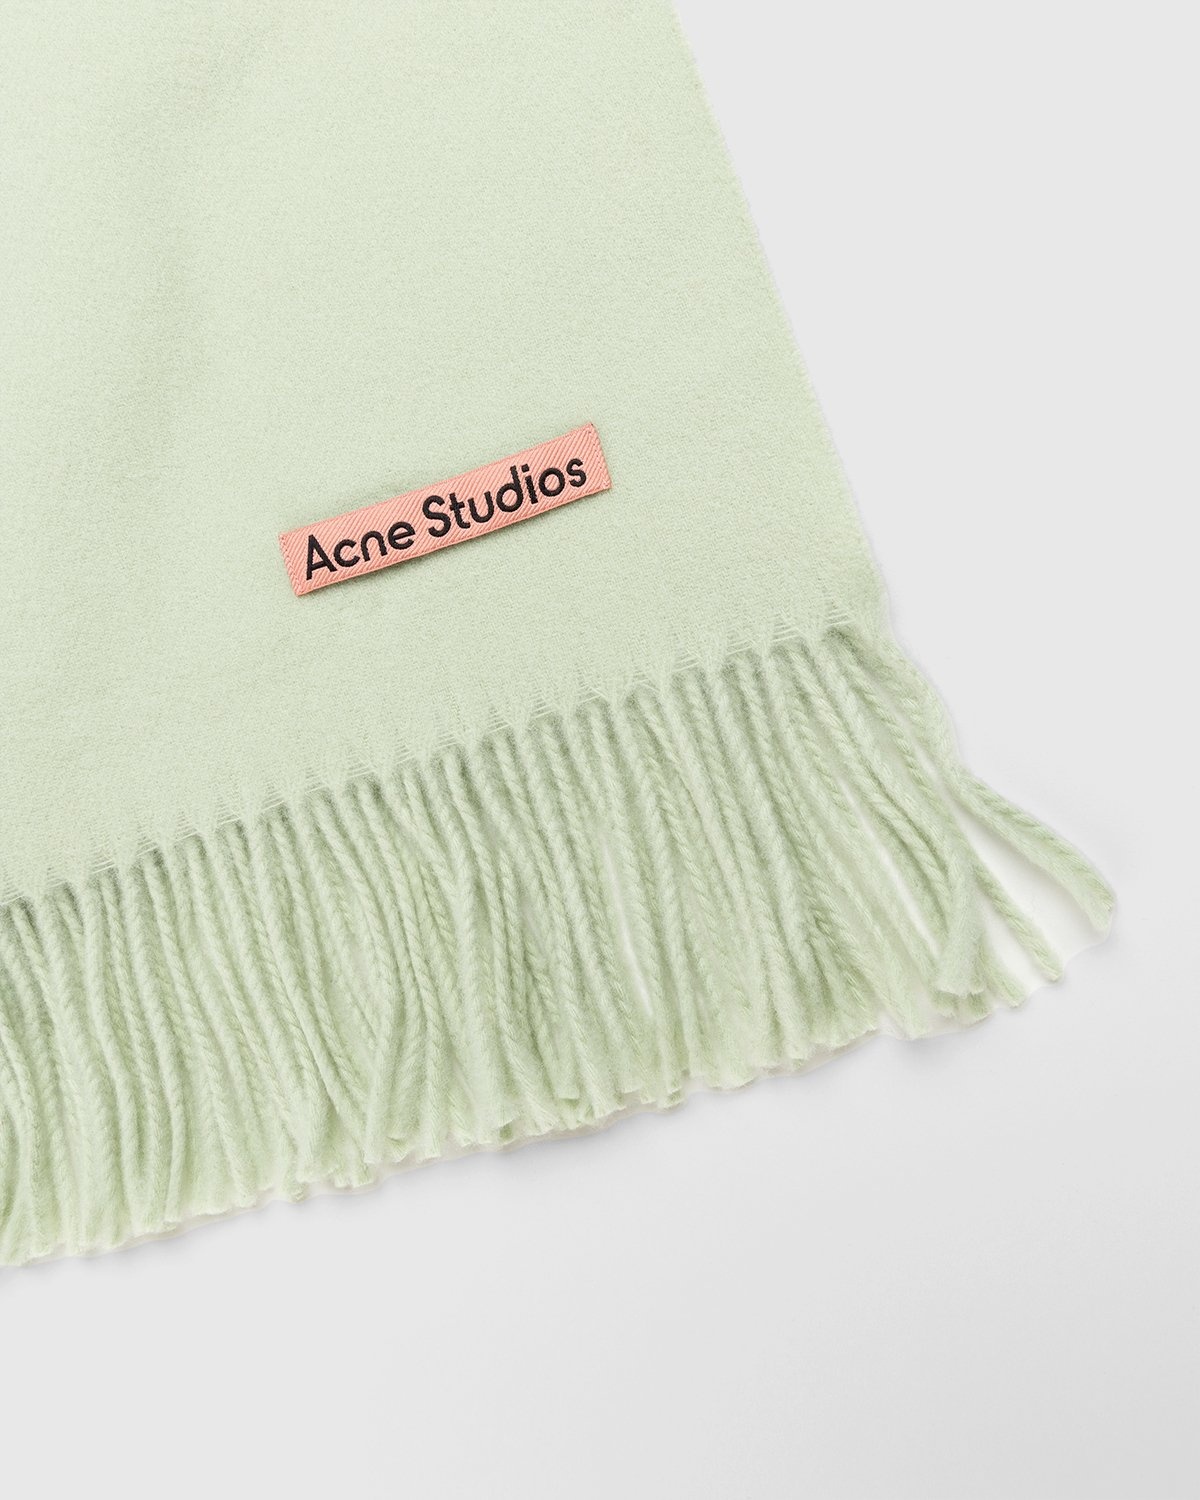 Acne Studios – Canada New Scarf Pale Green - Scarves - Green - Image 3